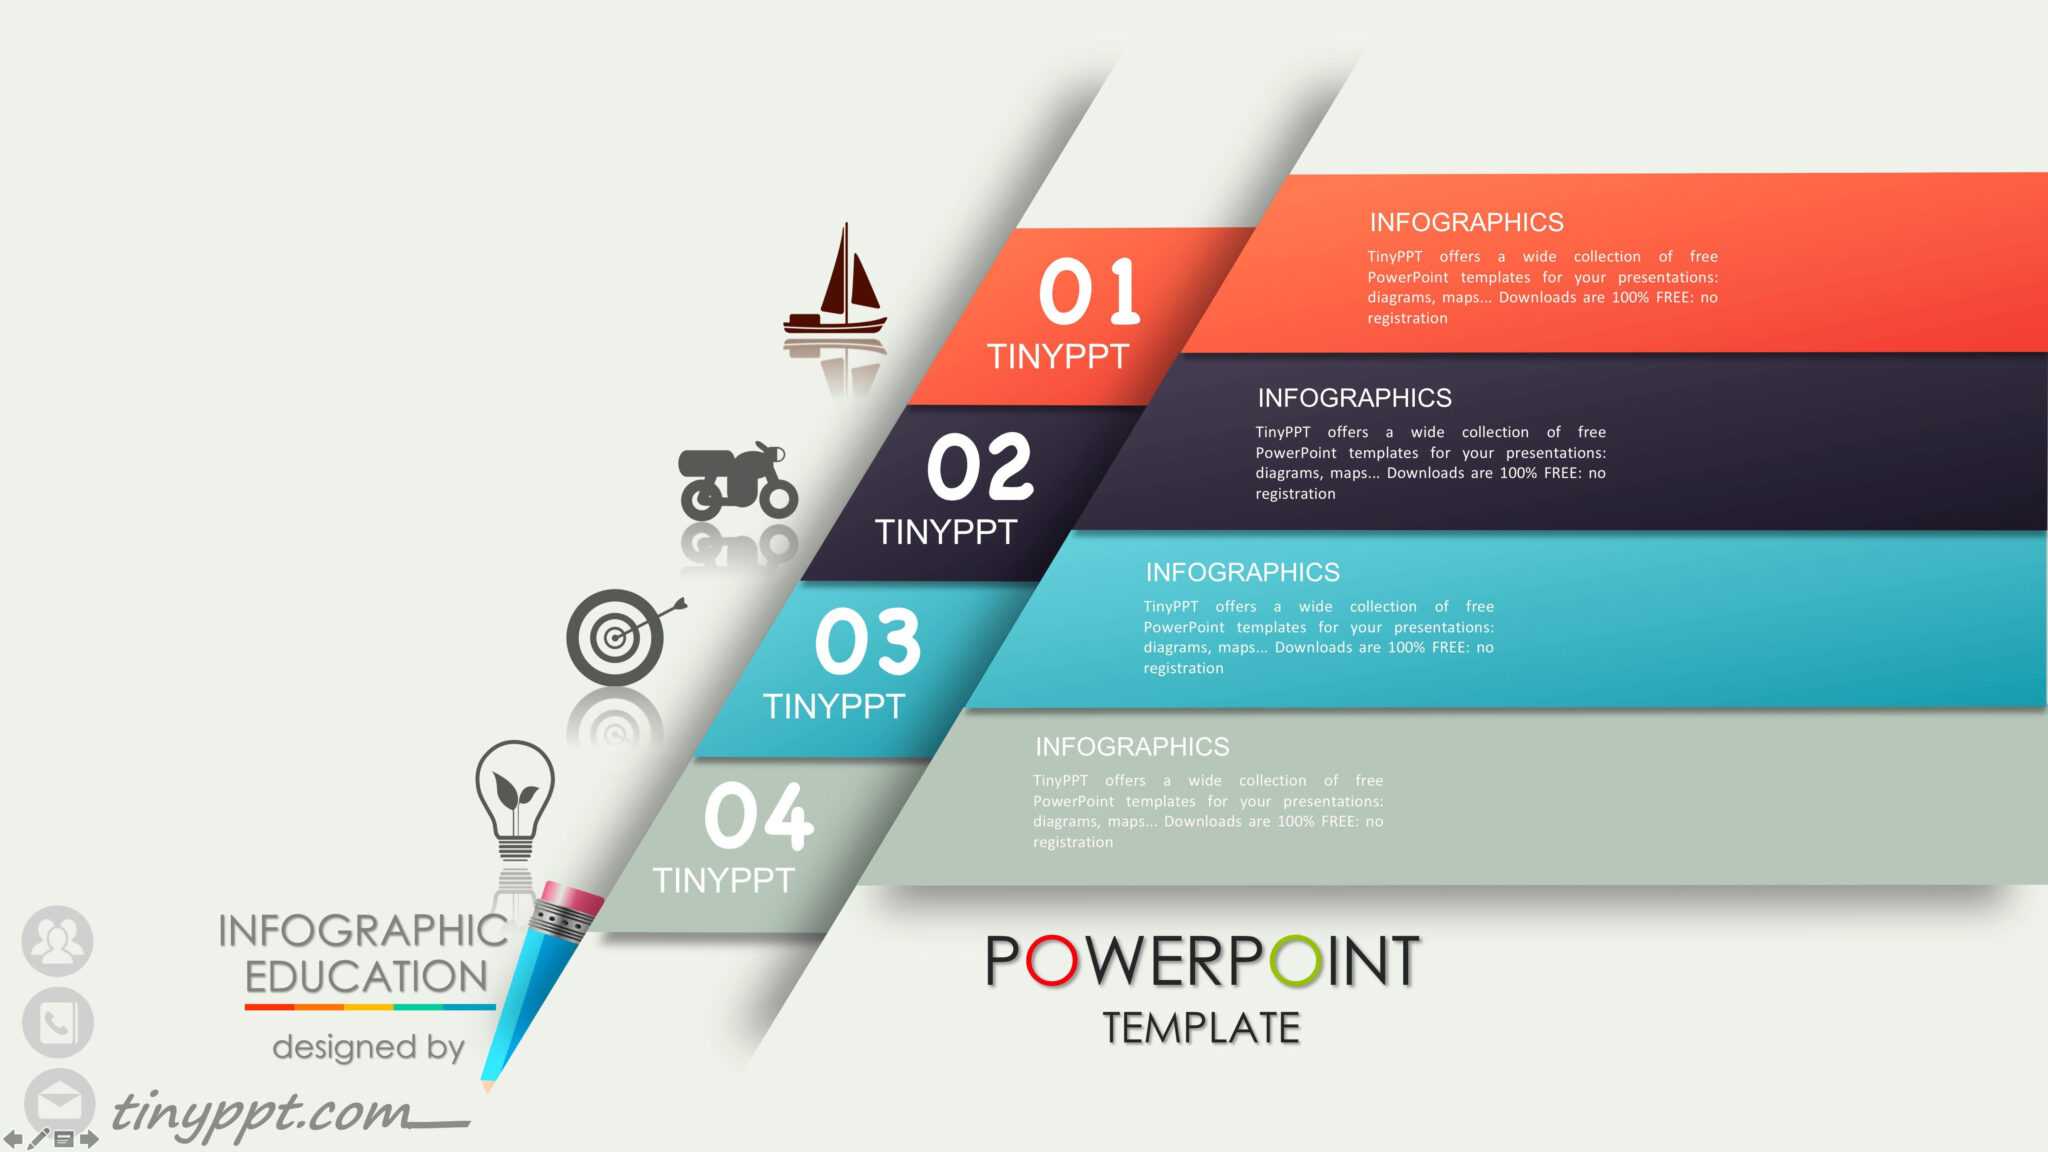 ppt templates for office presentation free download